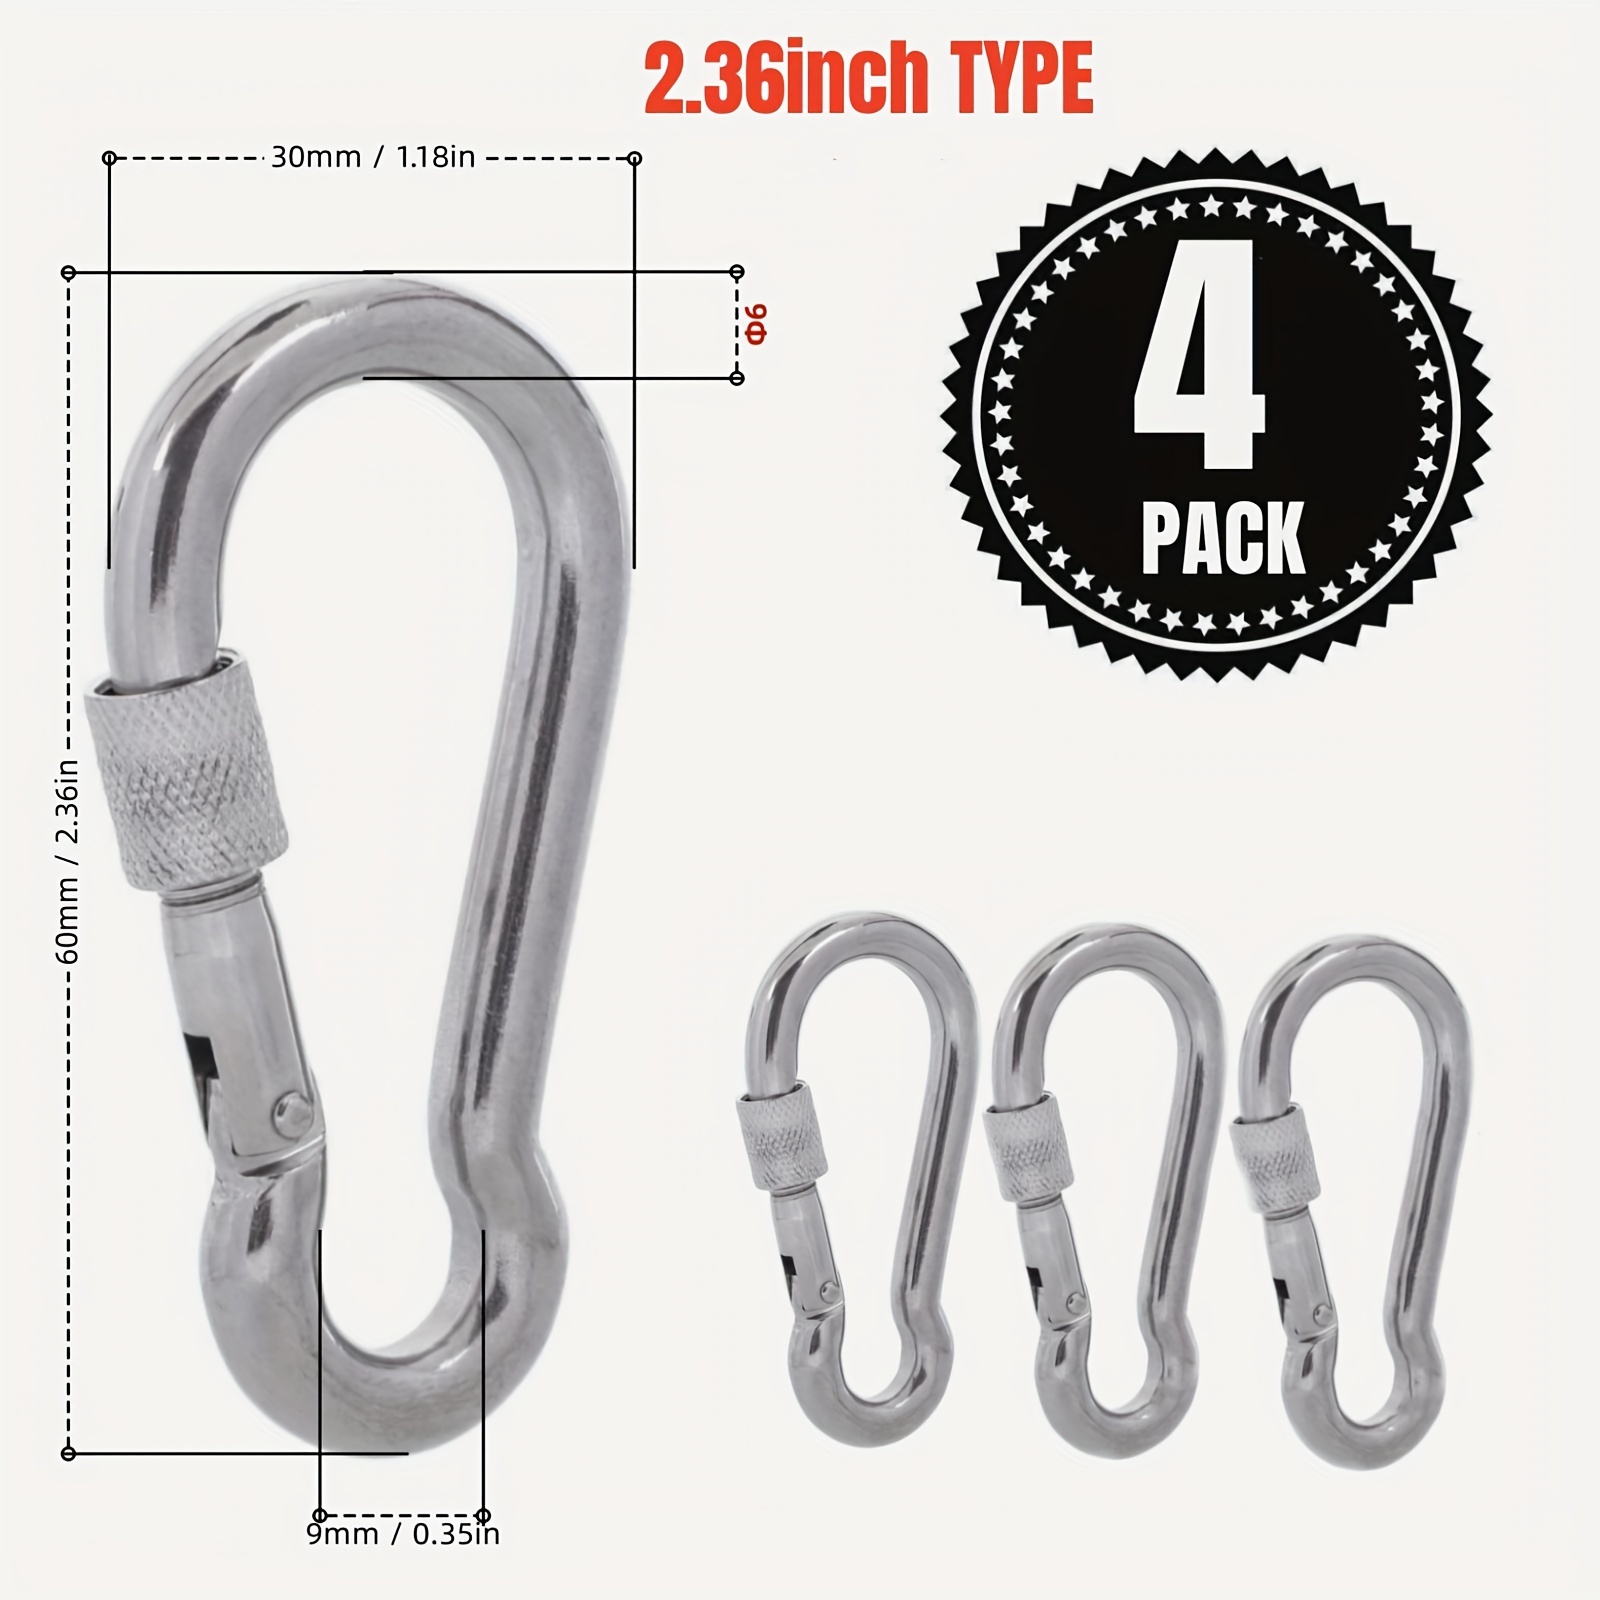 4pcs 6pcs Alloy Spring Snap Hook Carabiner For Outdoor Hiking